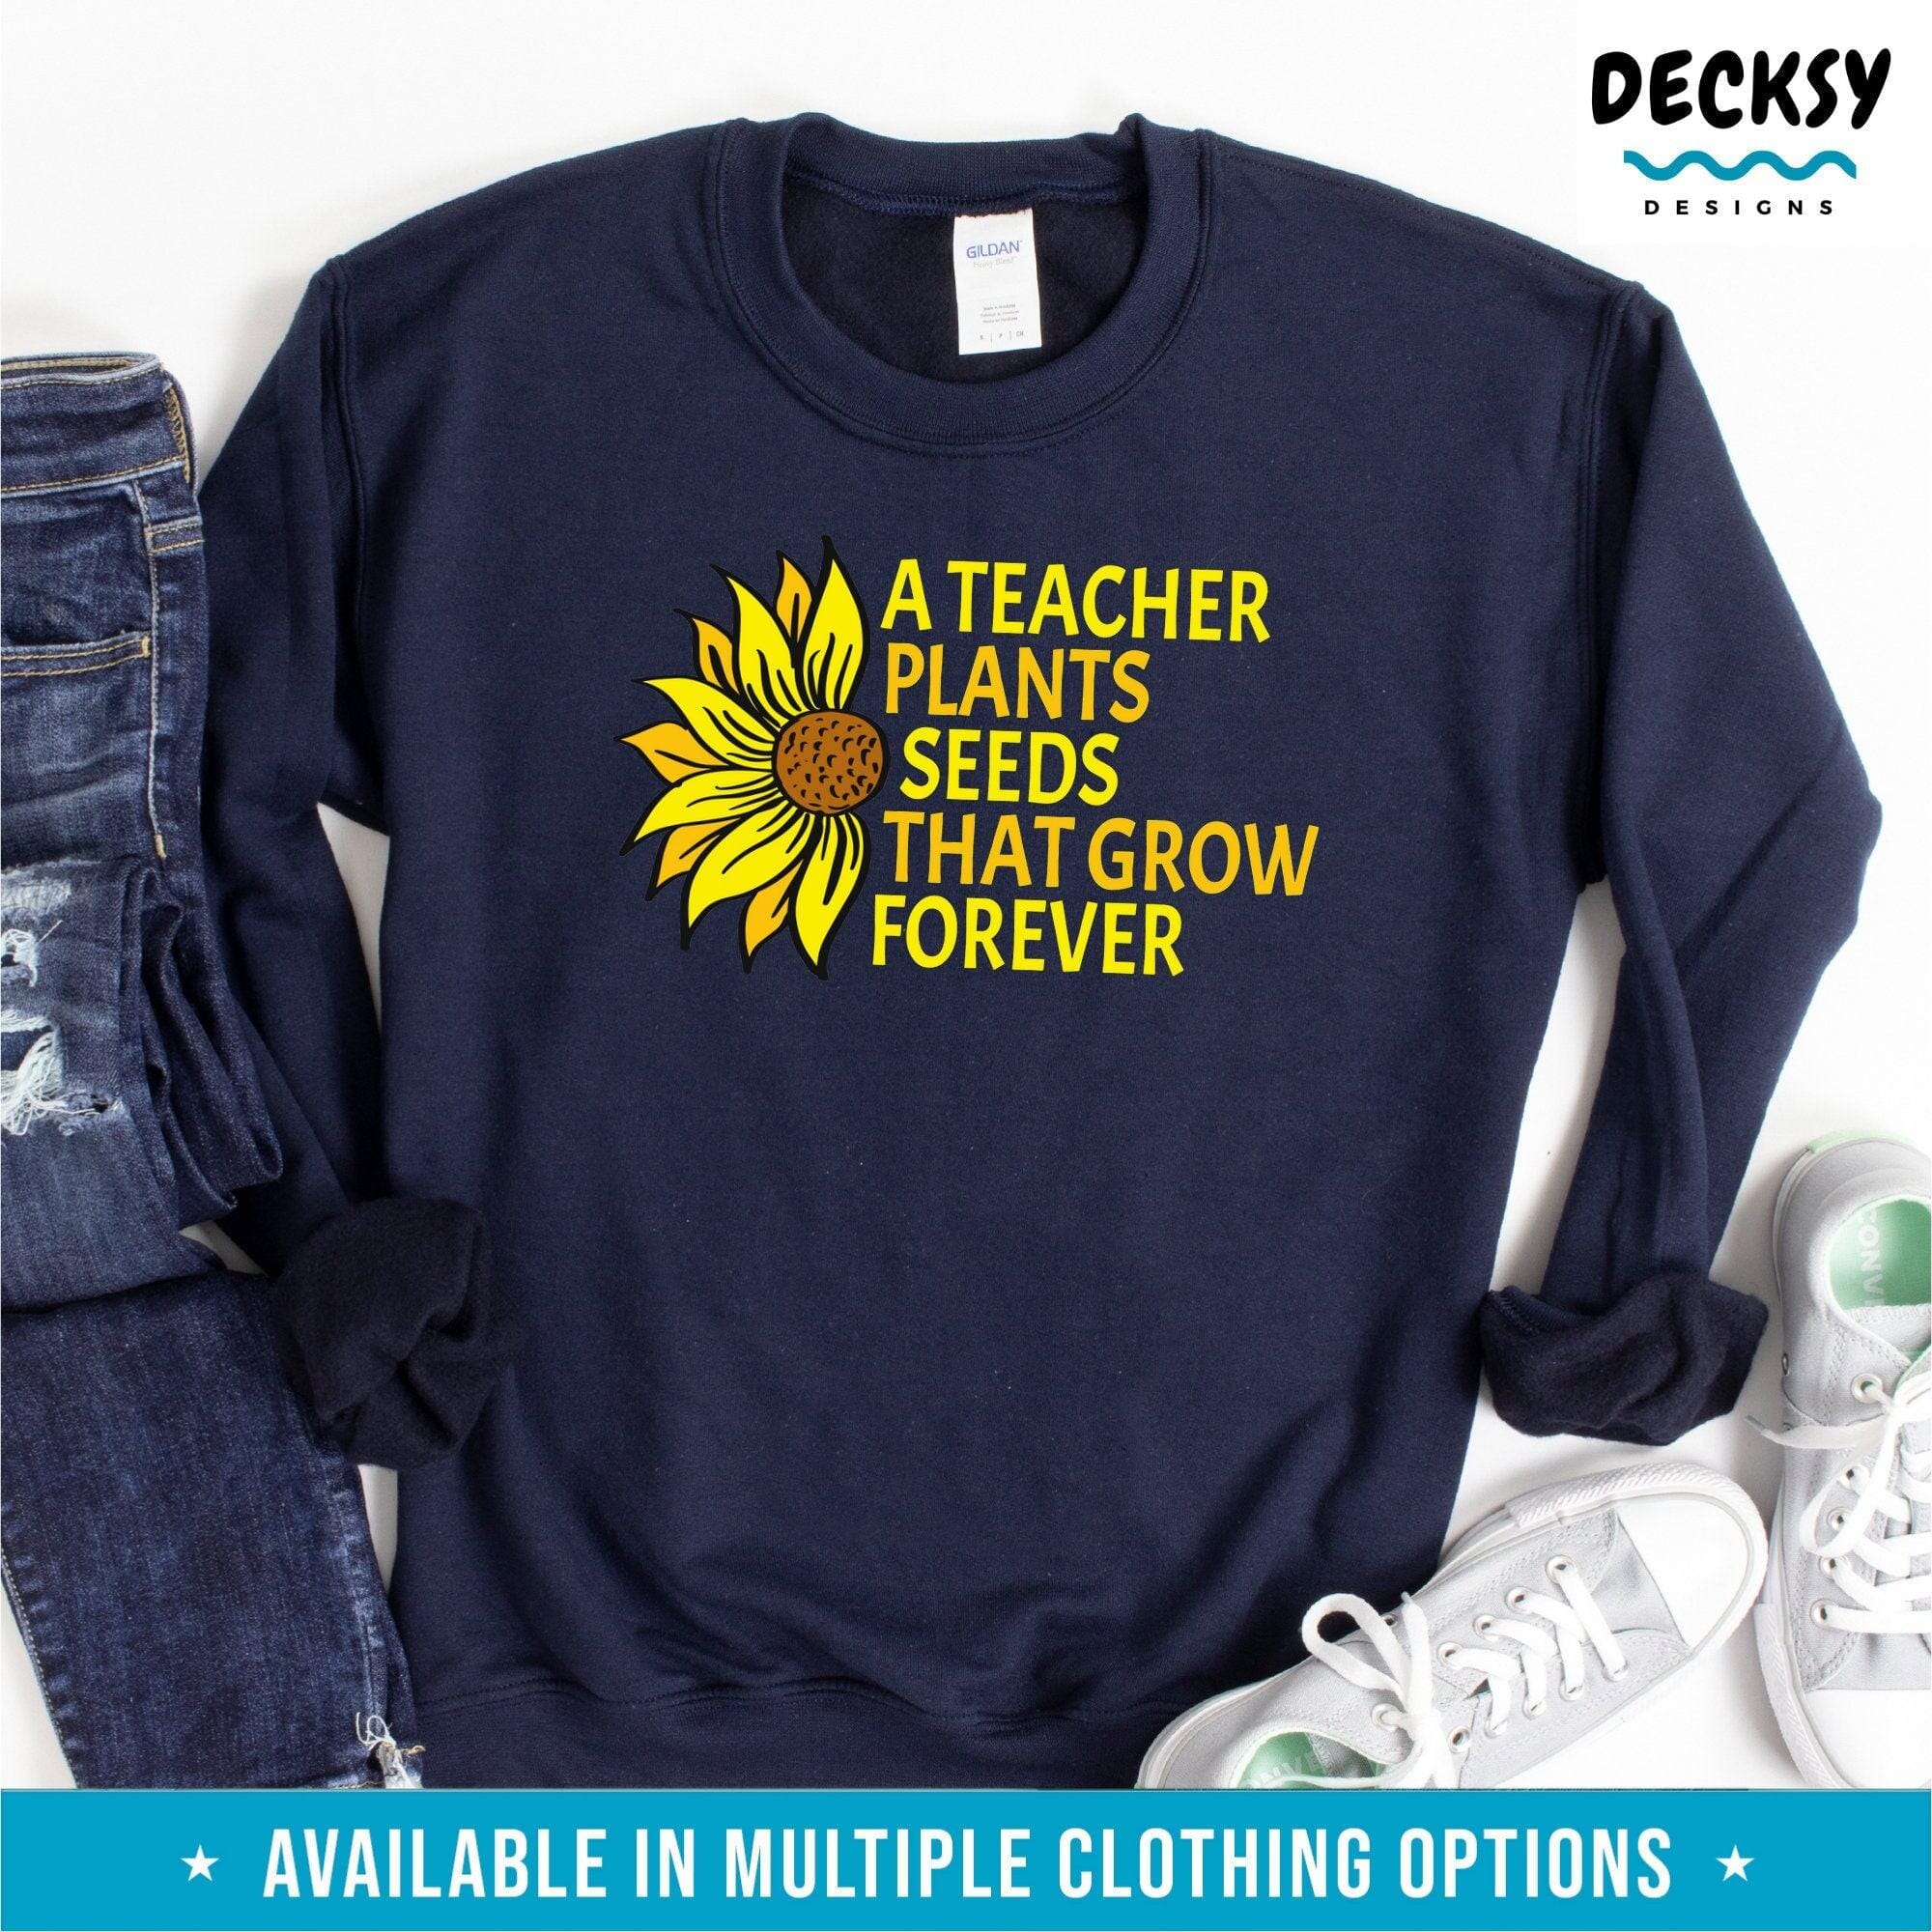 Inspirational Teacher Shirt, Gift For Teaching Assistant-Clothing:Gender-Neutral Adult Clothing:Tops & Tees:T-shirts:Graphic Tees-DecksyDesigns